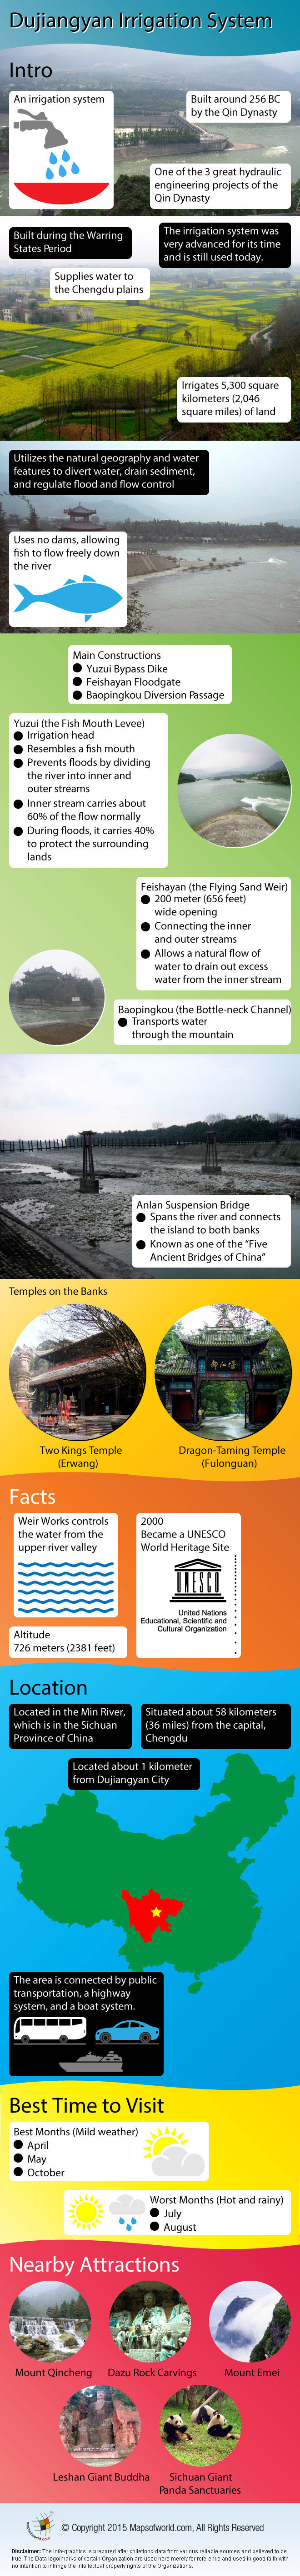 Dujiangyan Irrigation System Infographic